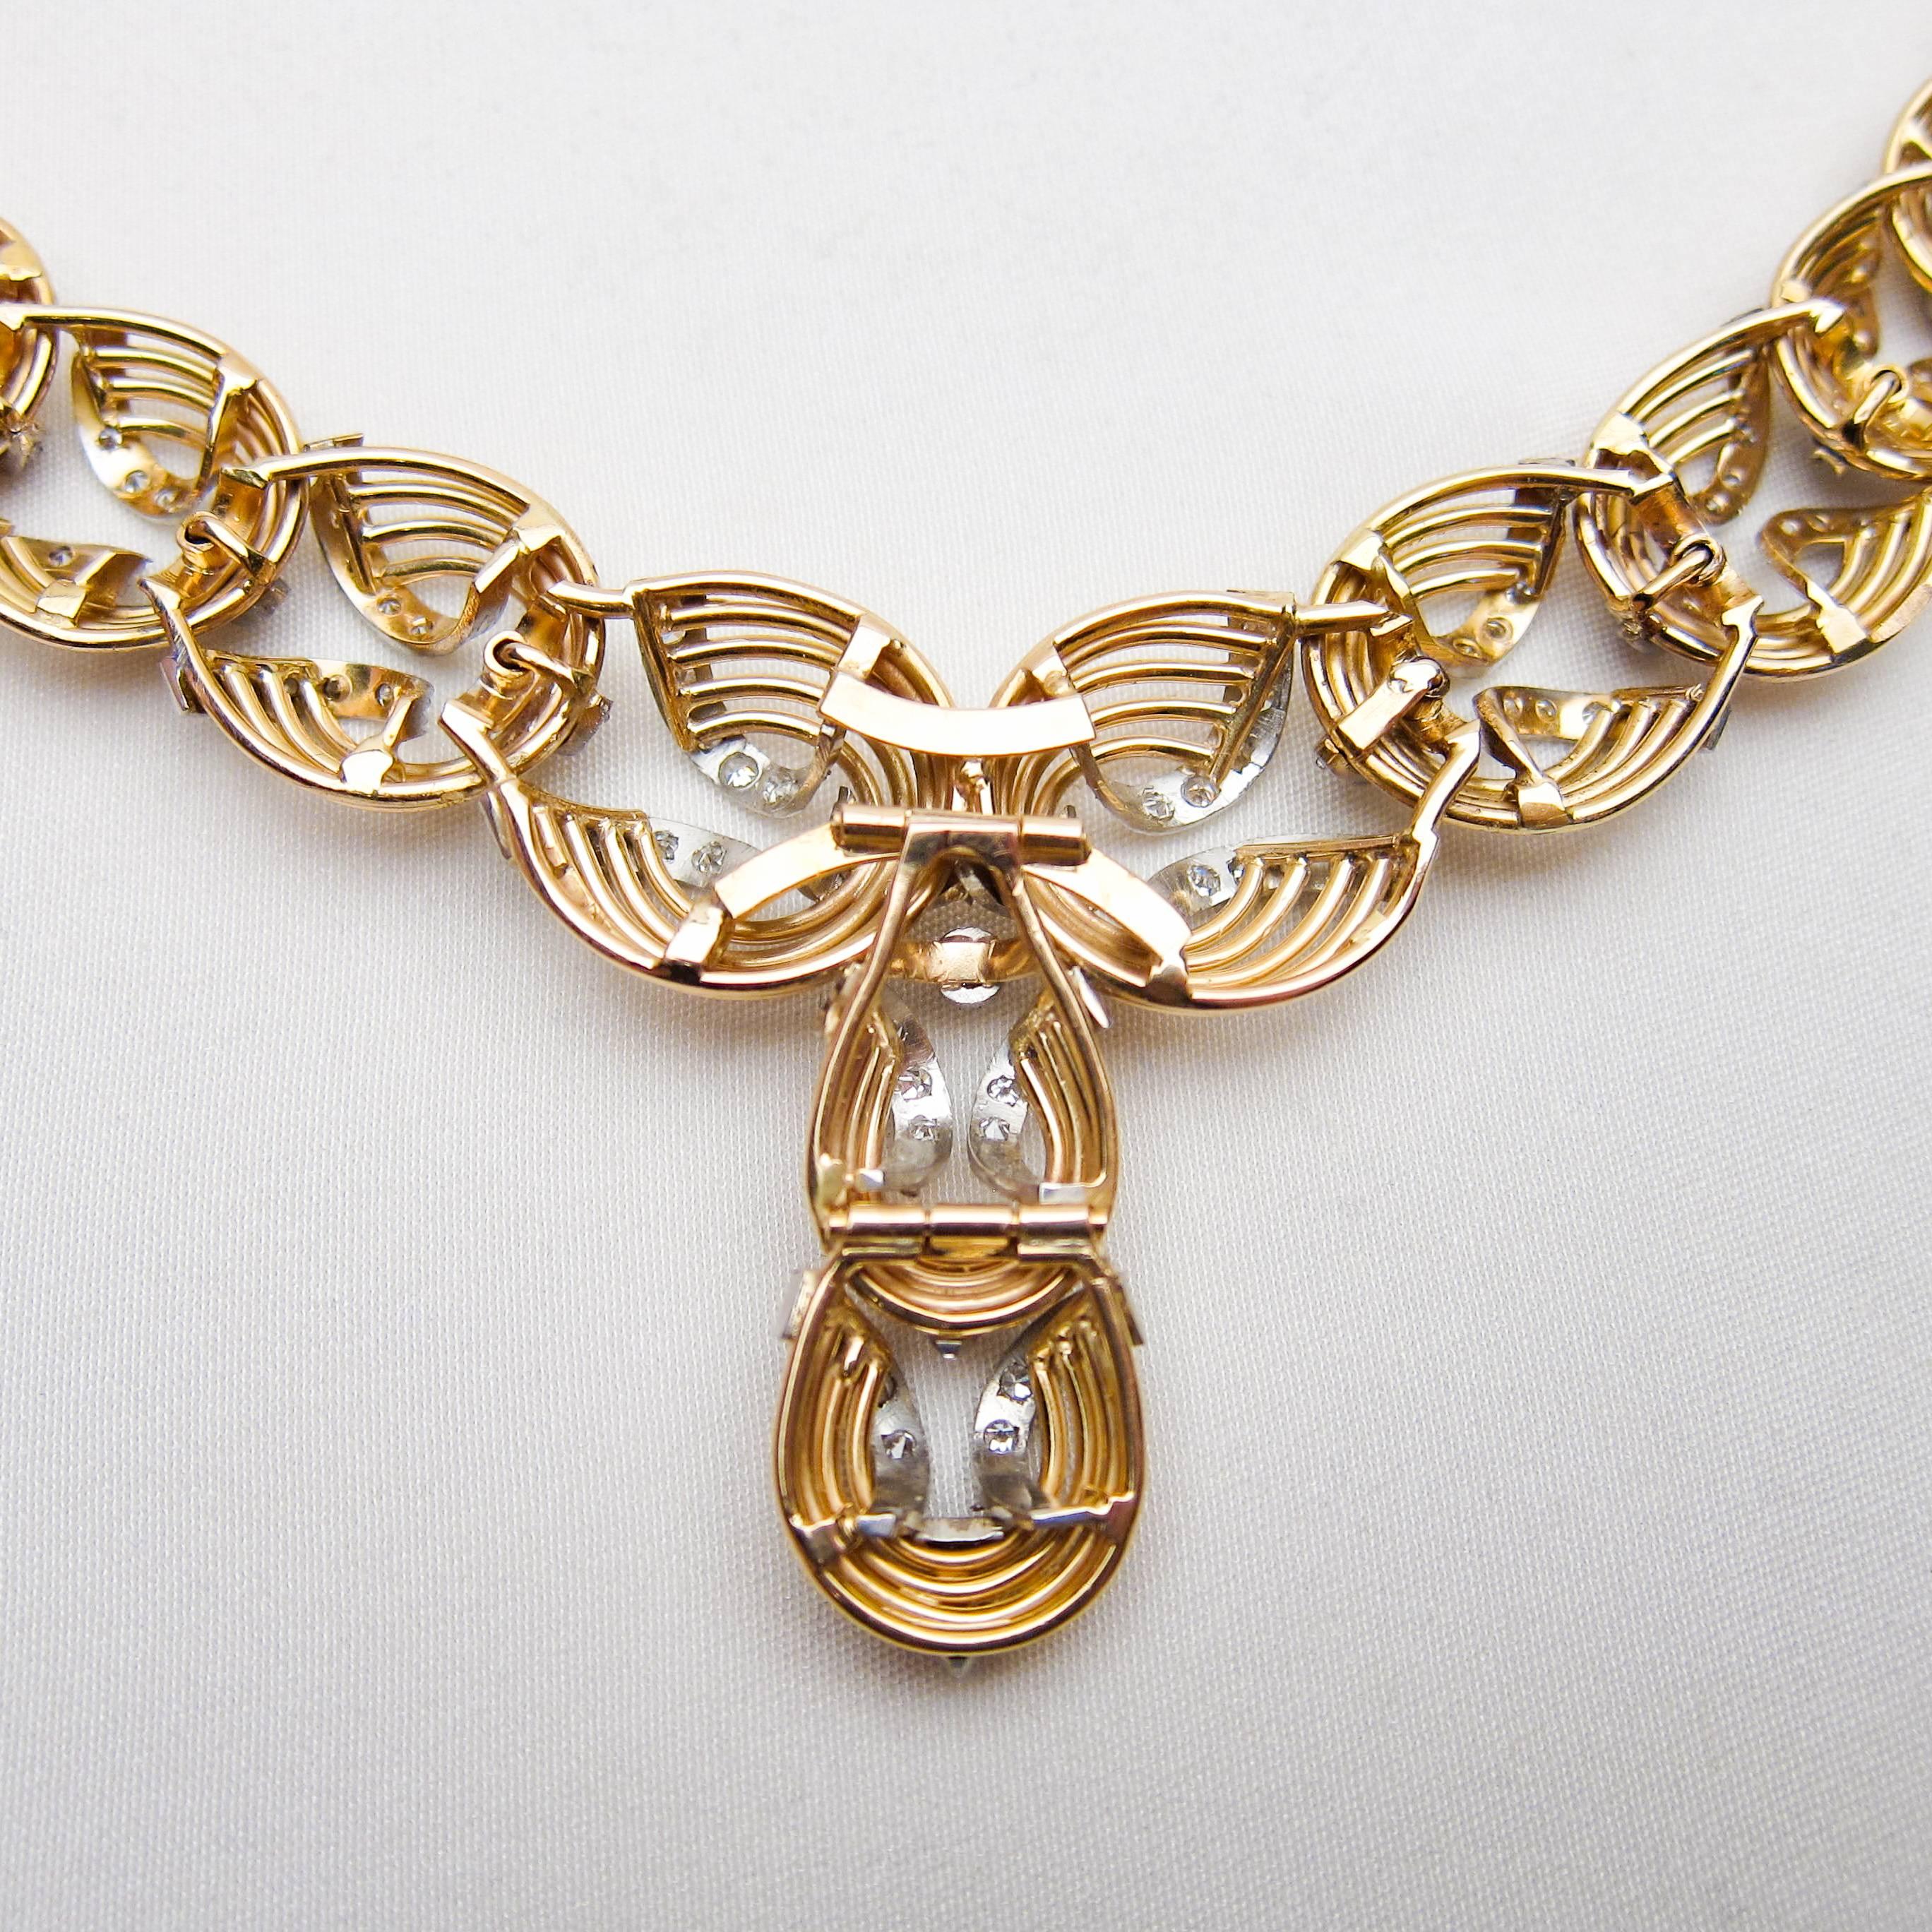 Retro Era 2.1 Carat Diamond and 18 Karat Gold Handmade Rope Necklace In Excellent Condition For Sale In Seattle, WA